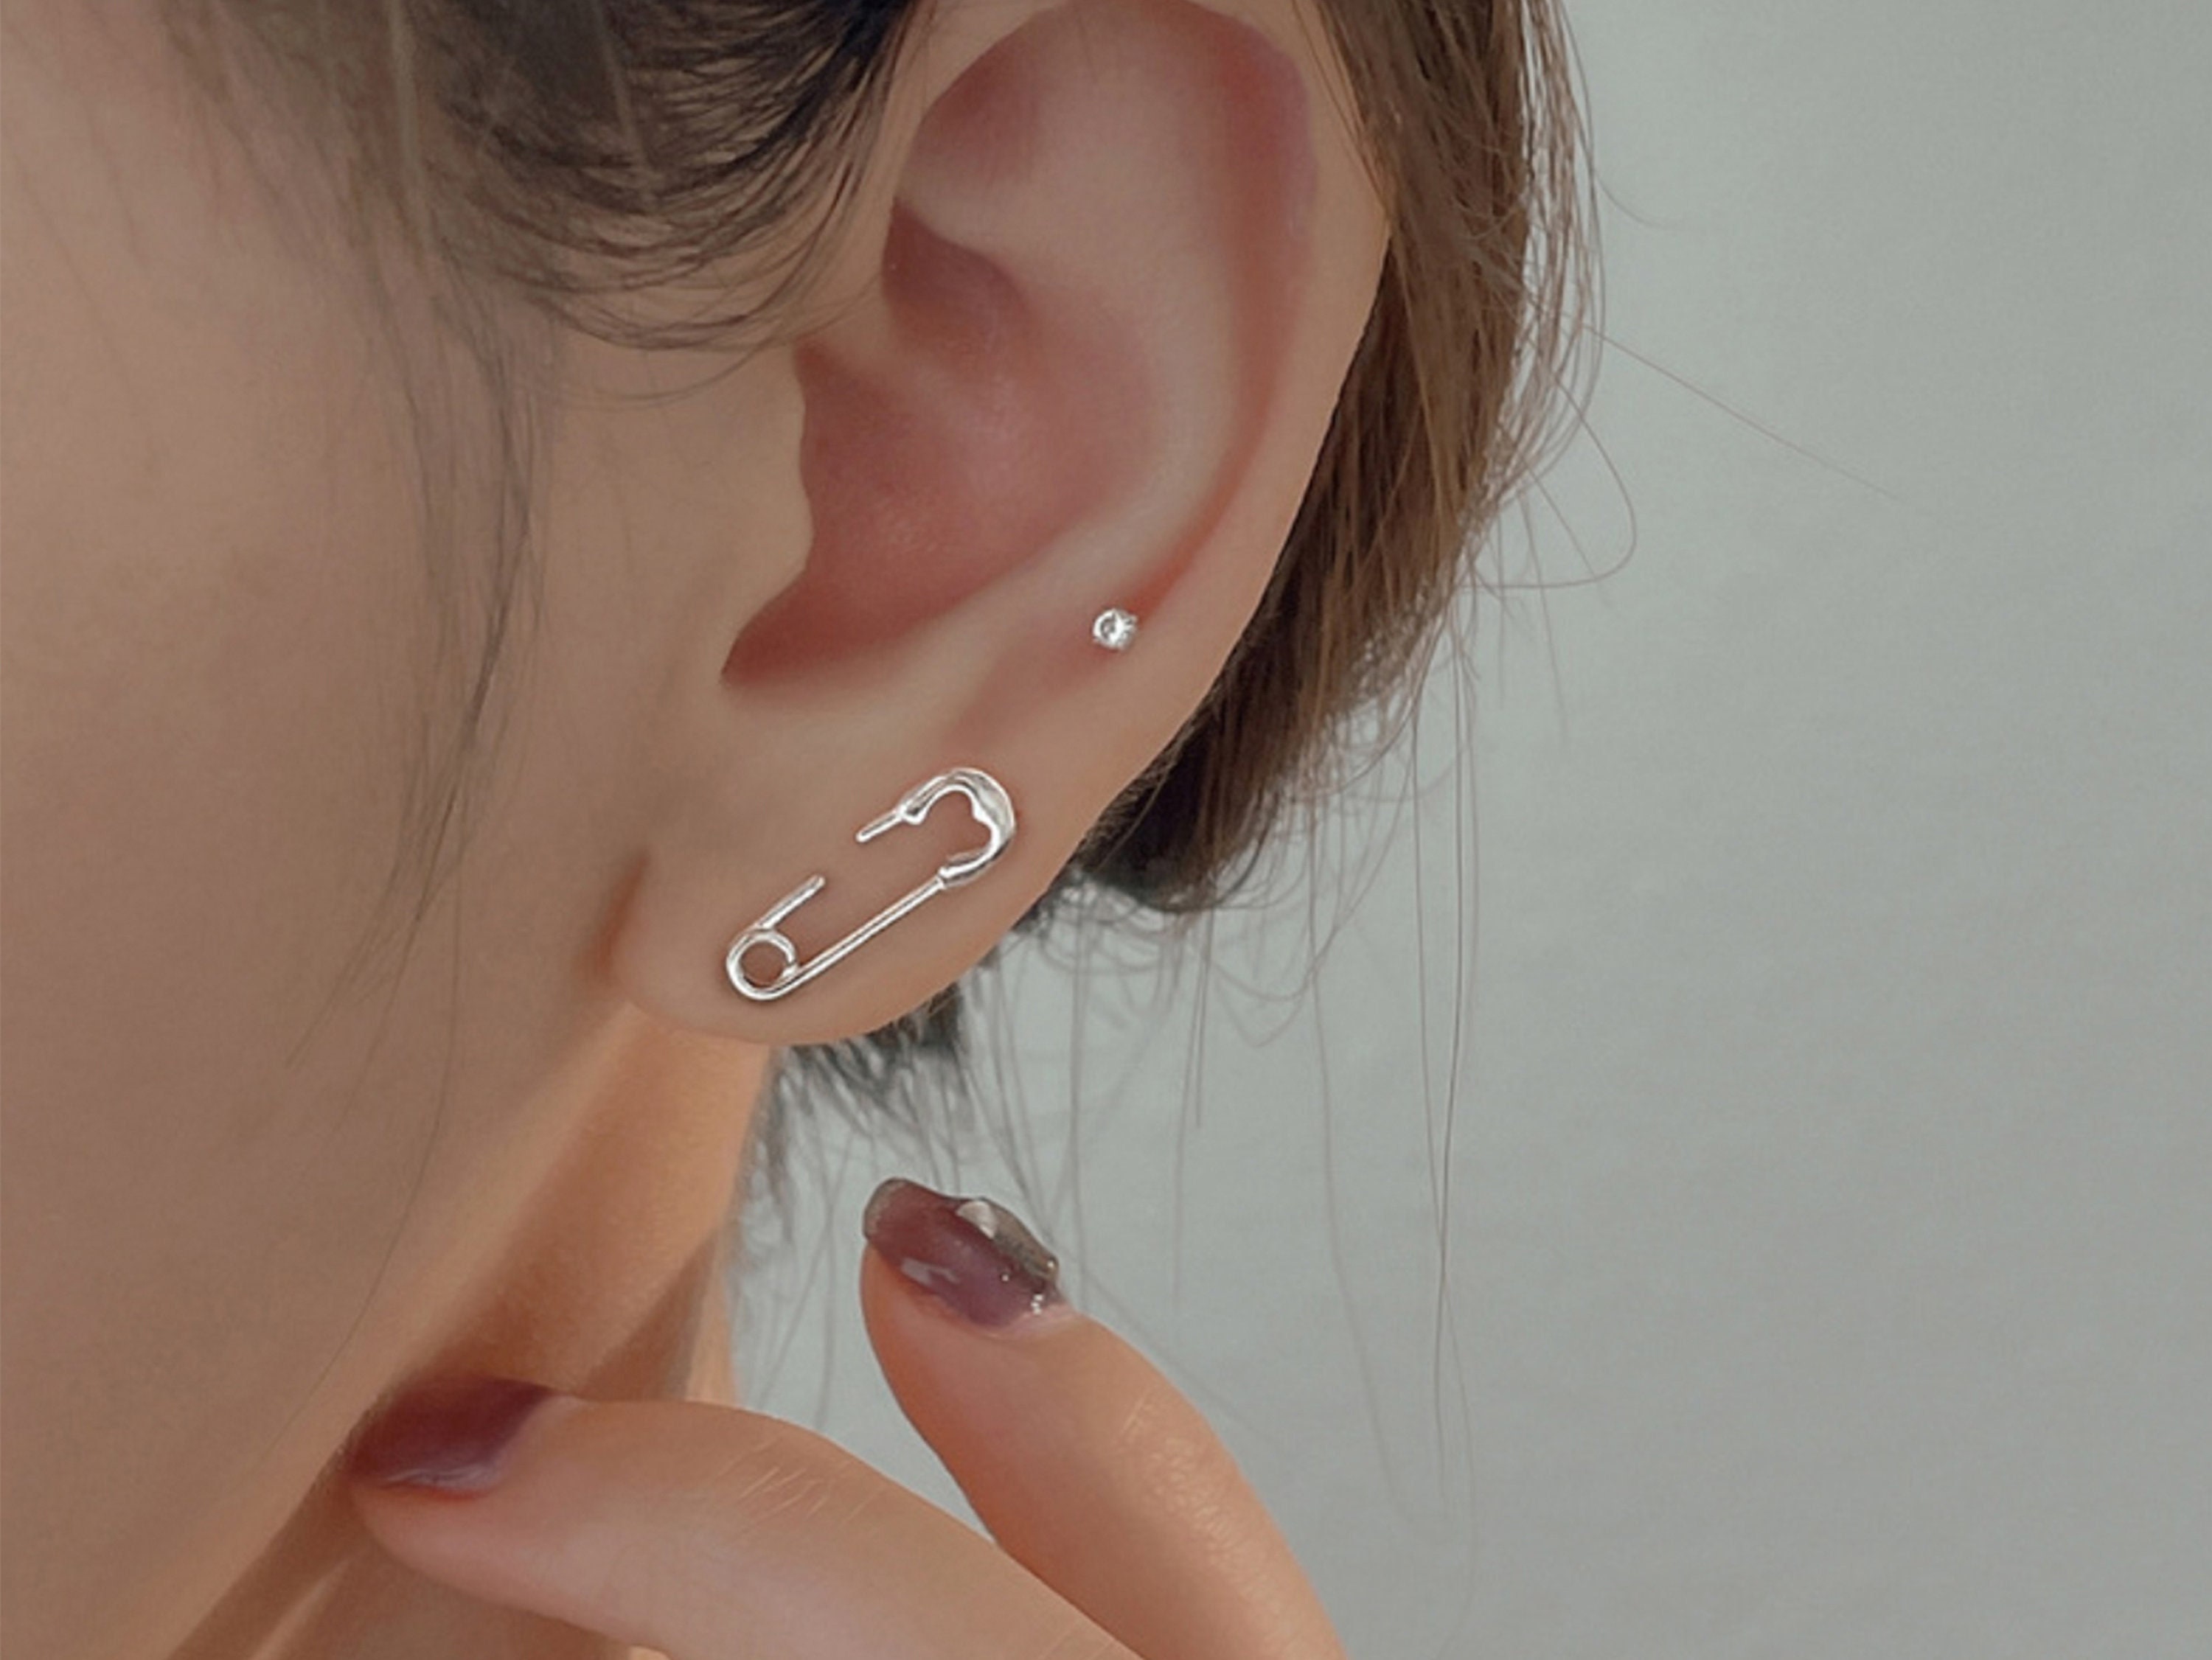 Safety Pin Earring – Studs